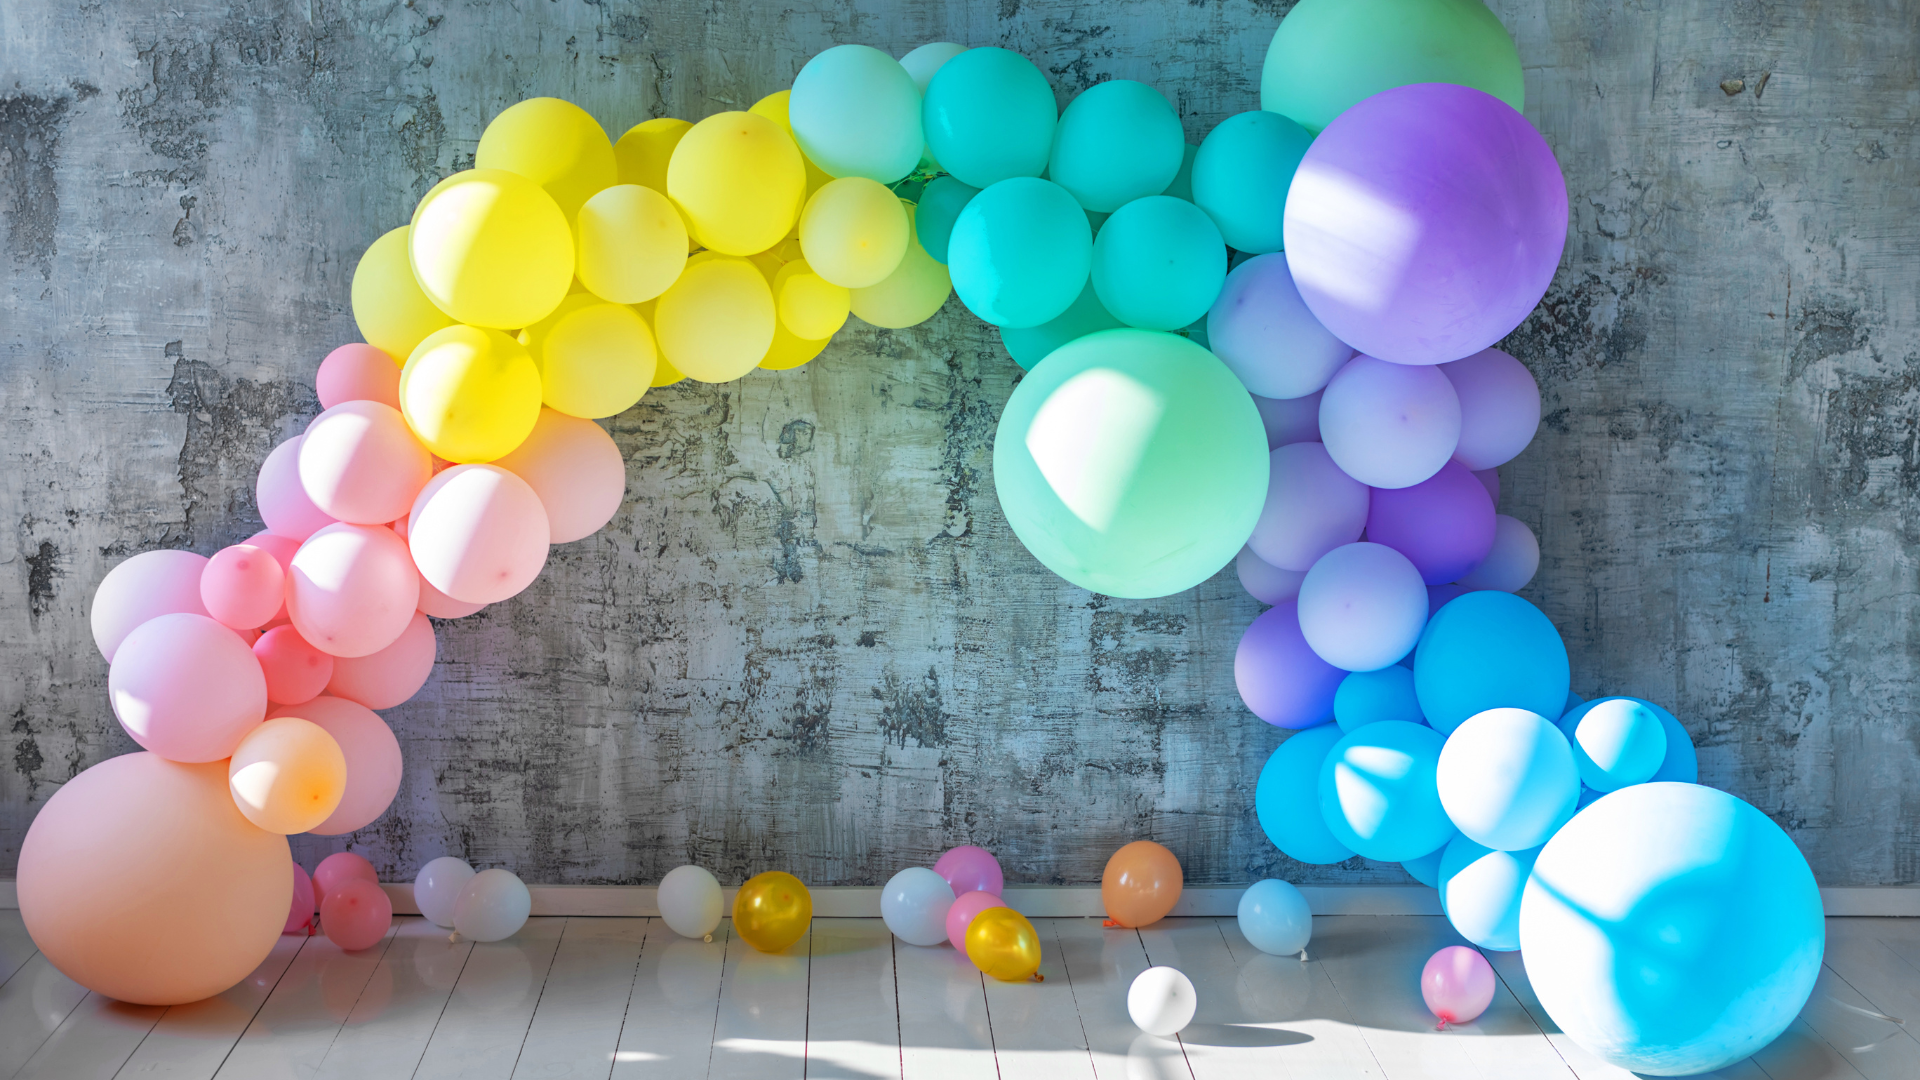 Make Your Next Event Unforgettable with Balloon Arches in Seattle